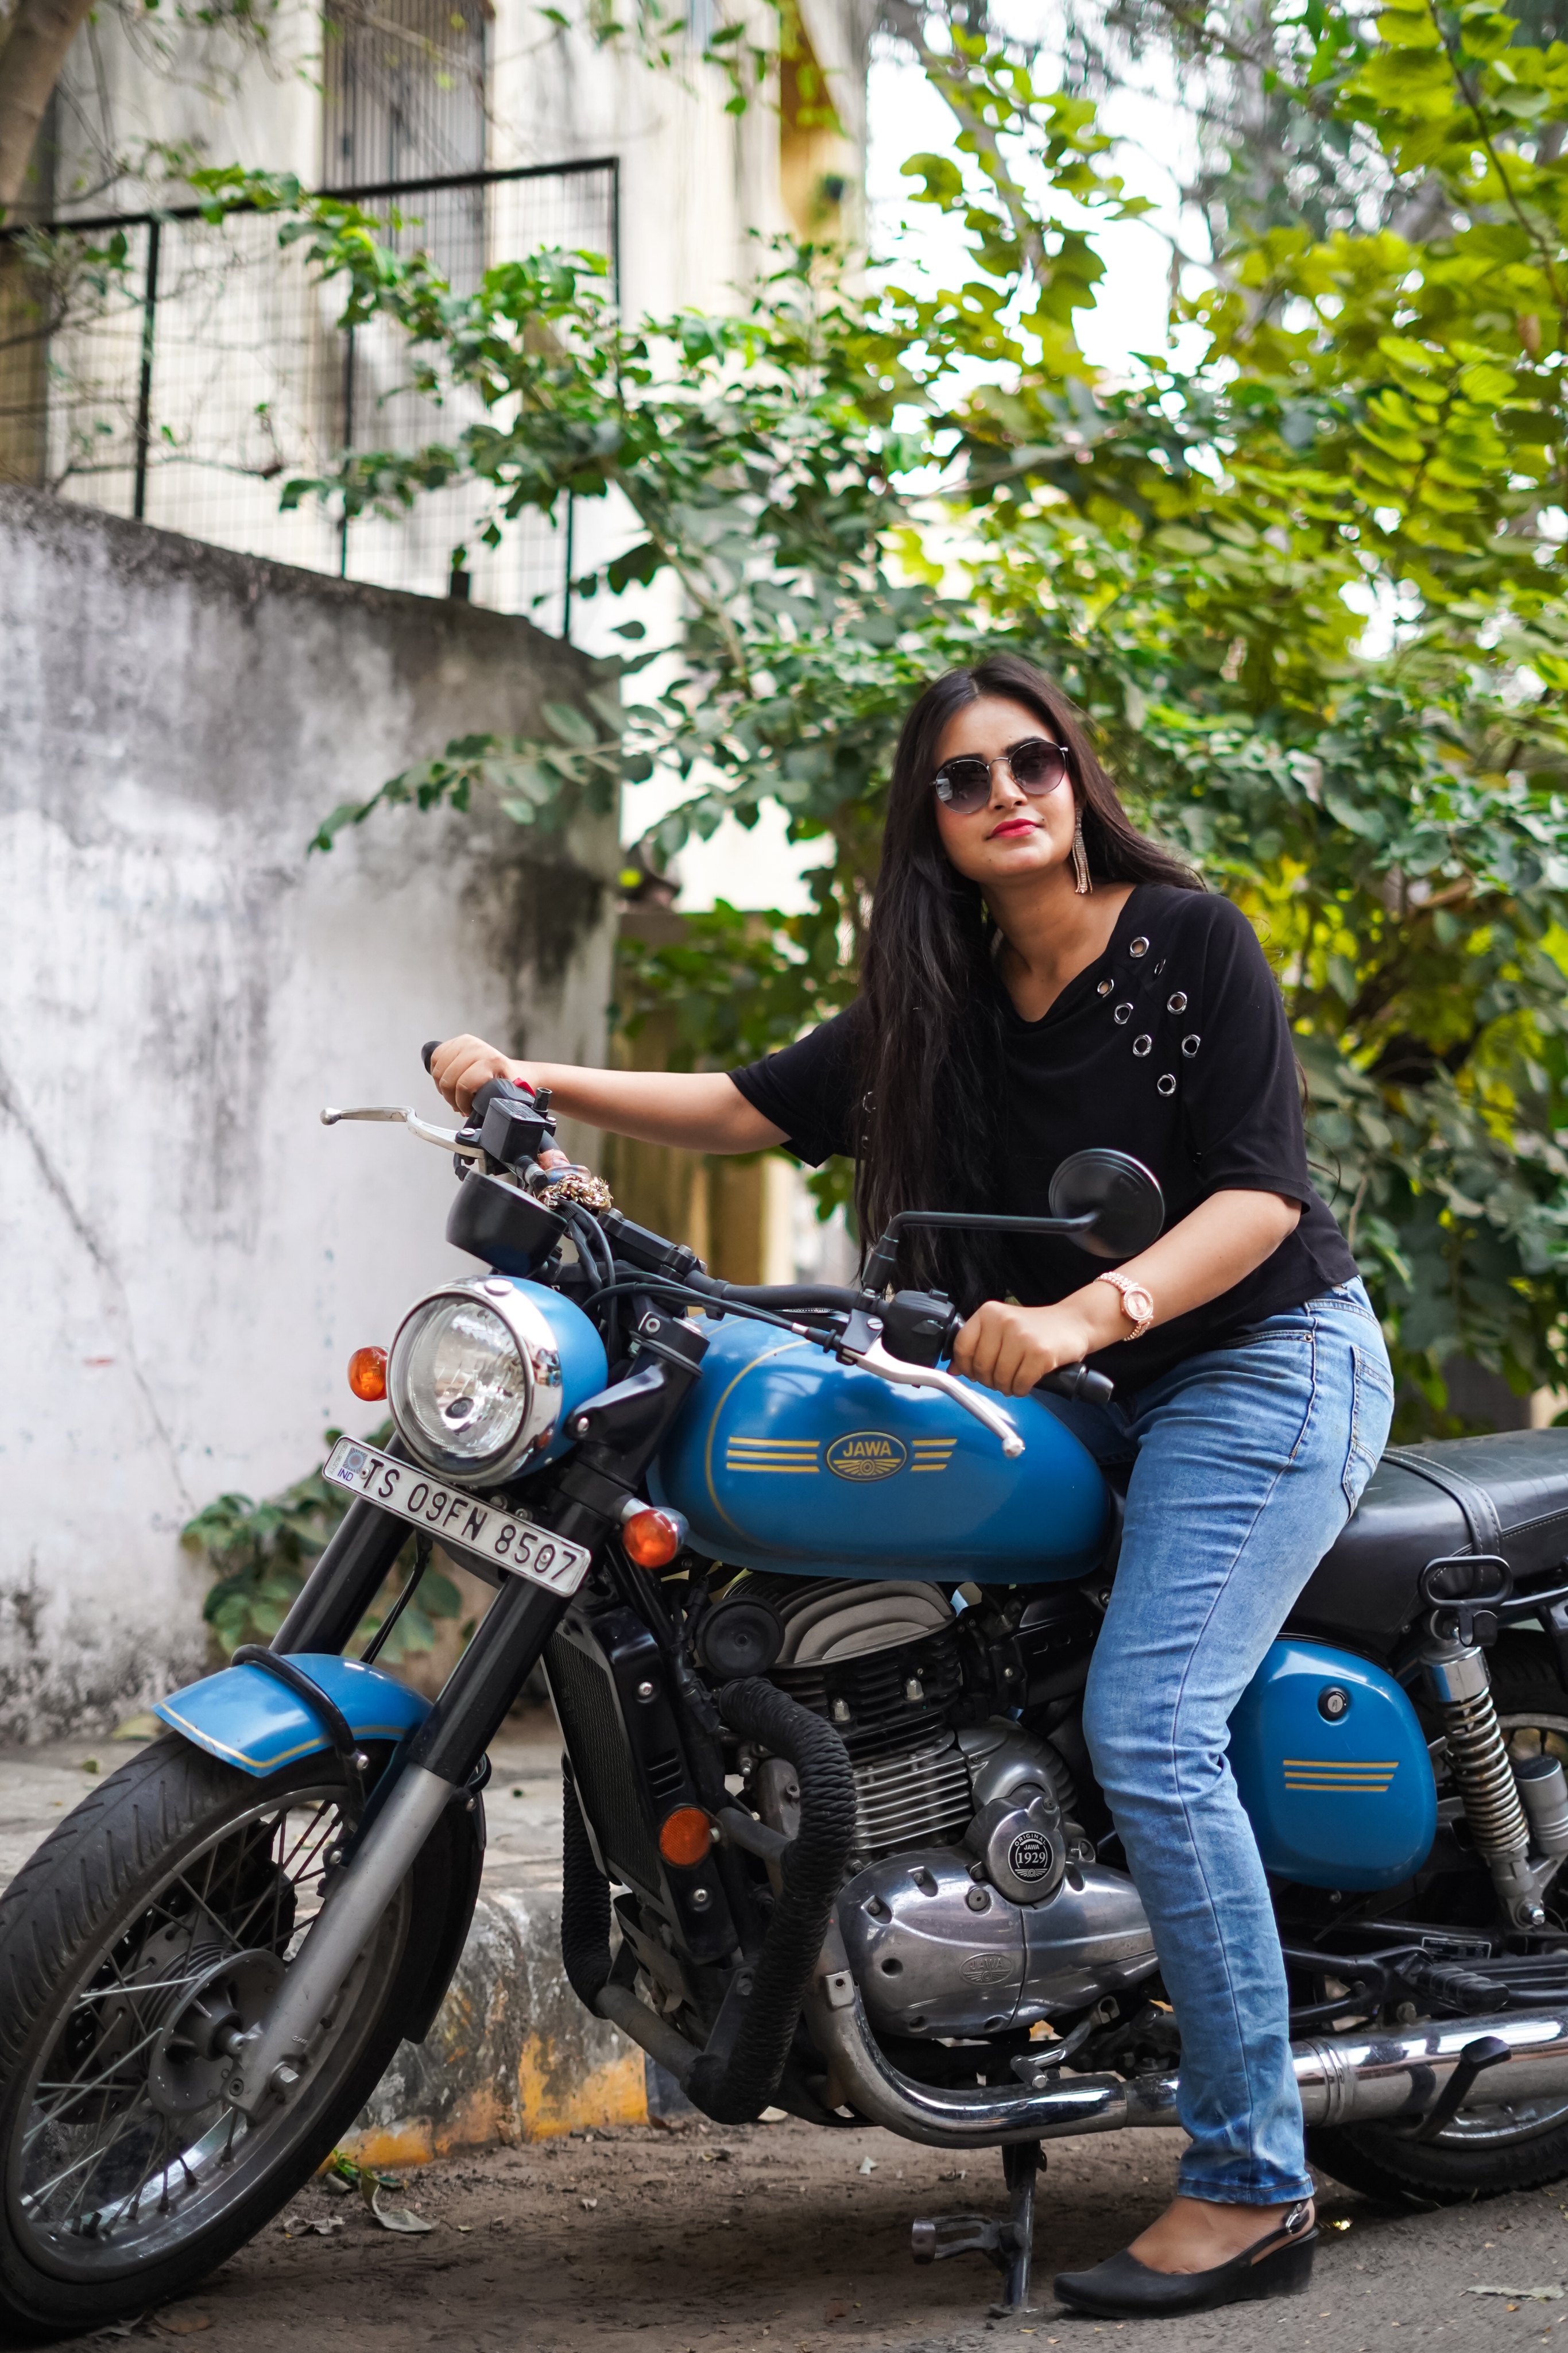 Photoshoot with Royal Enfield for girls idea || best pose for girls ||  Photoshoot ideas for girls - YouTube